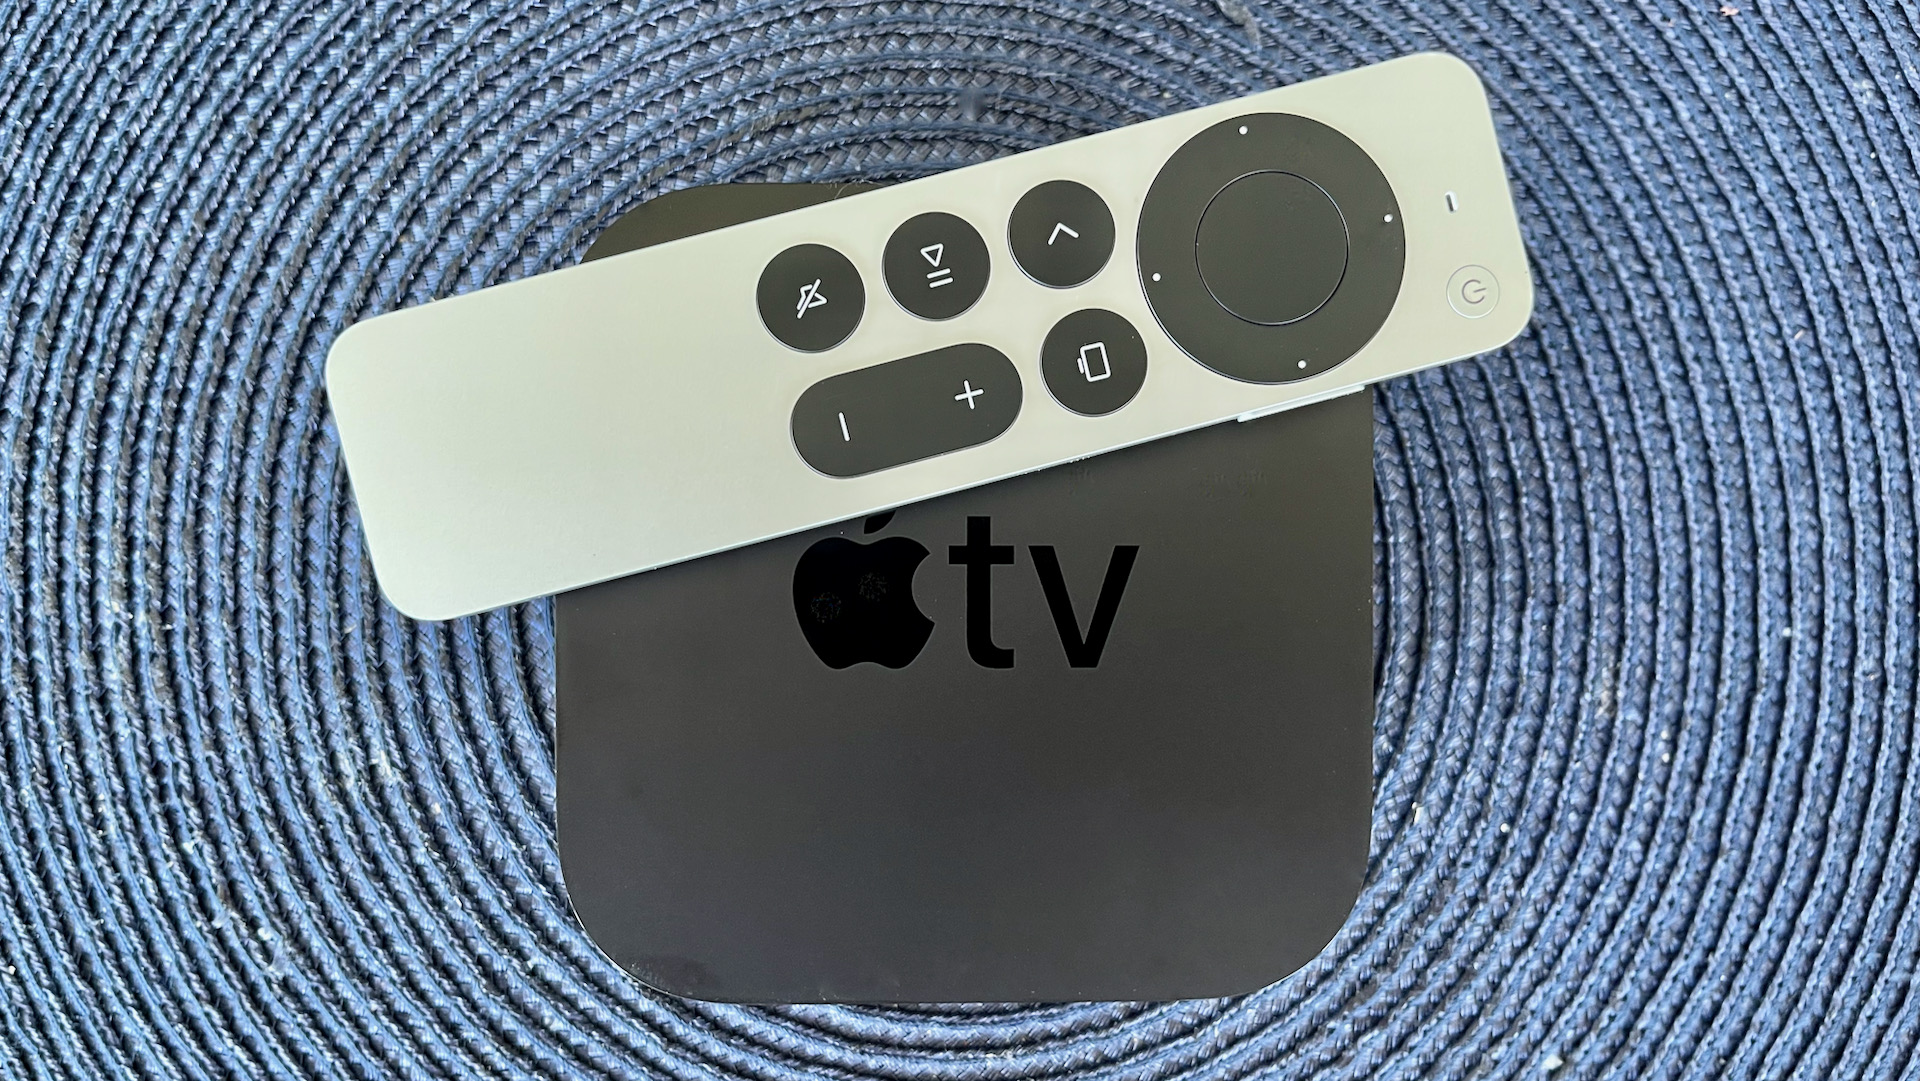 An Apple TV 4K with its remote on top of it lying on a carpet made of blue yarn woven into a circle.